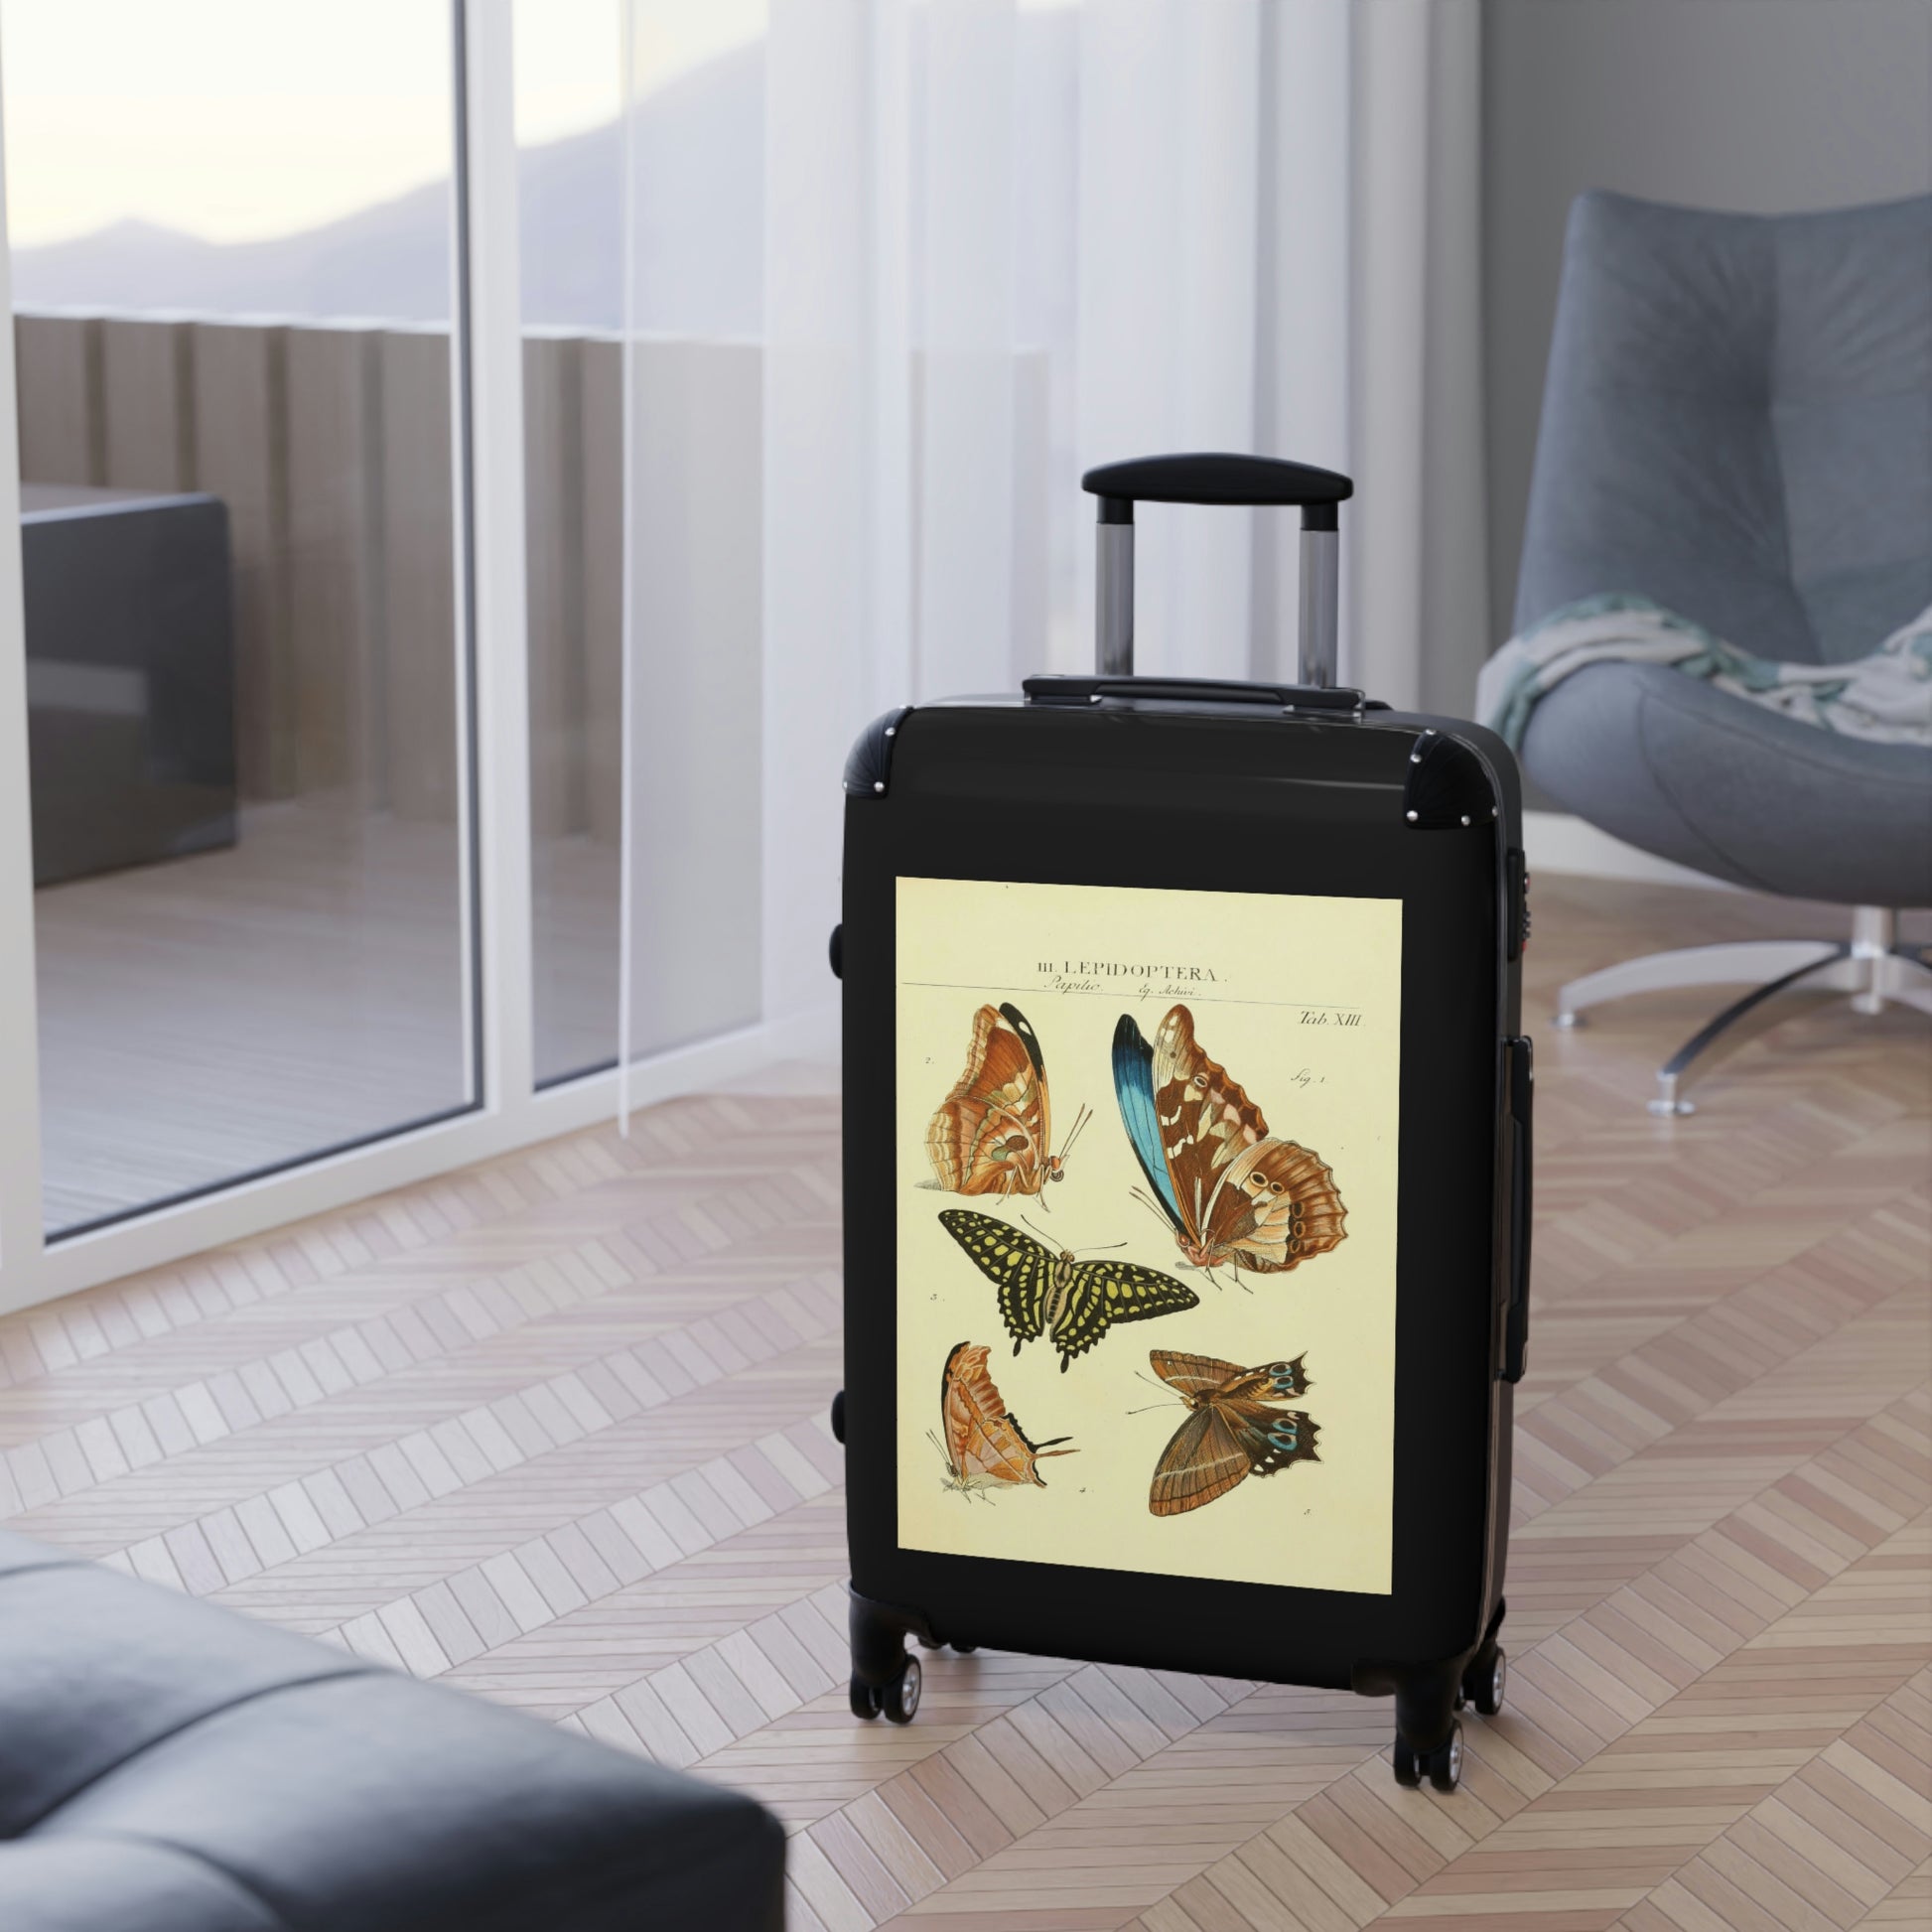 Getrott Butterflies Macrolepidopteran Rhopalocera Lepidoptera Papilic Achivi Cabin Suitcase Rolling Luggage Inner Pockets Extended Storage Adjustable Telescopic Handle Inner Pockets Double wheeled Polycarbonate Hard-shell Built-in Lock